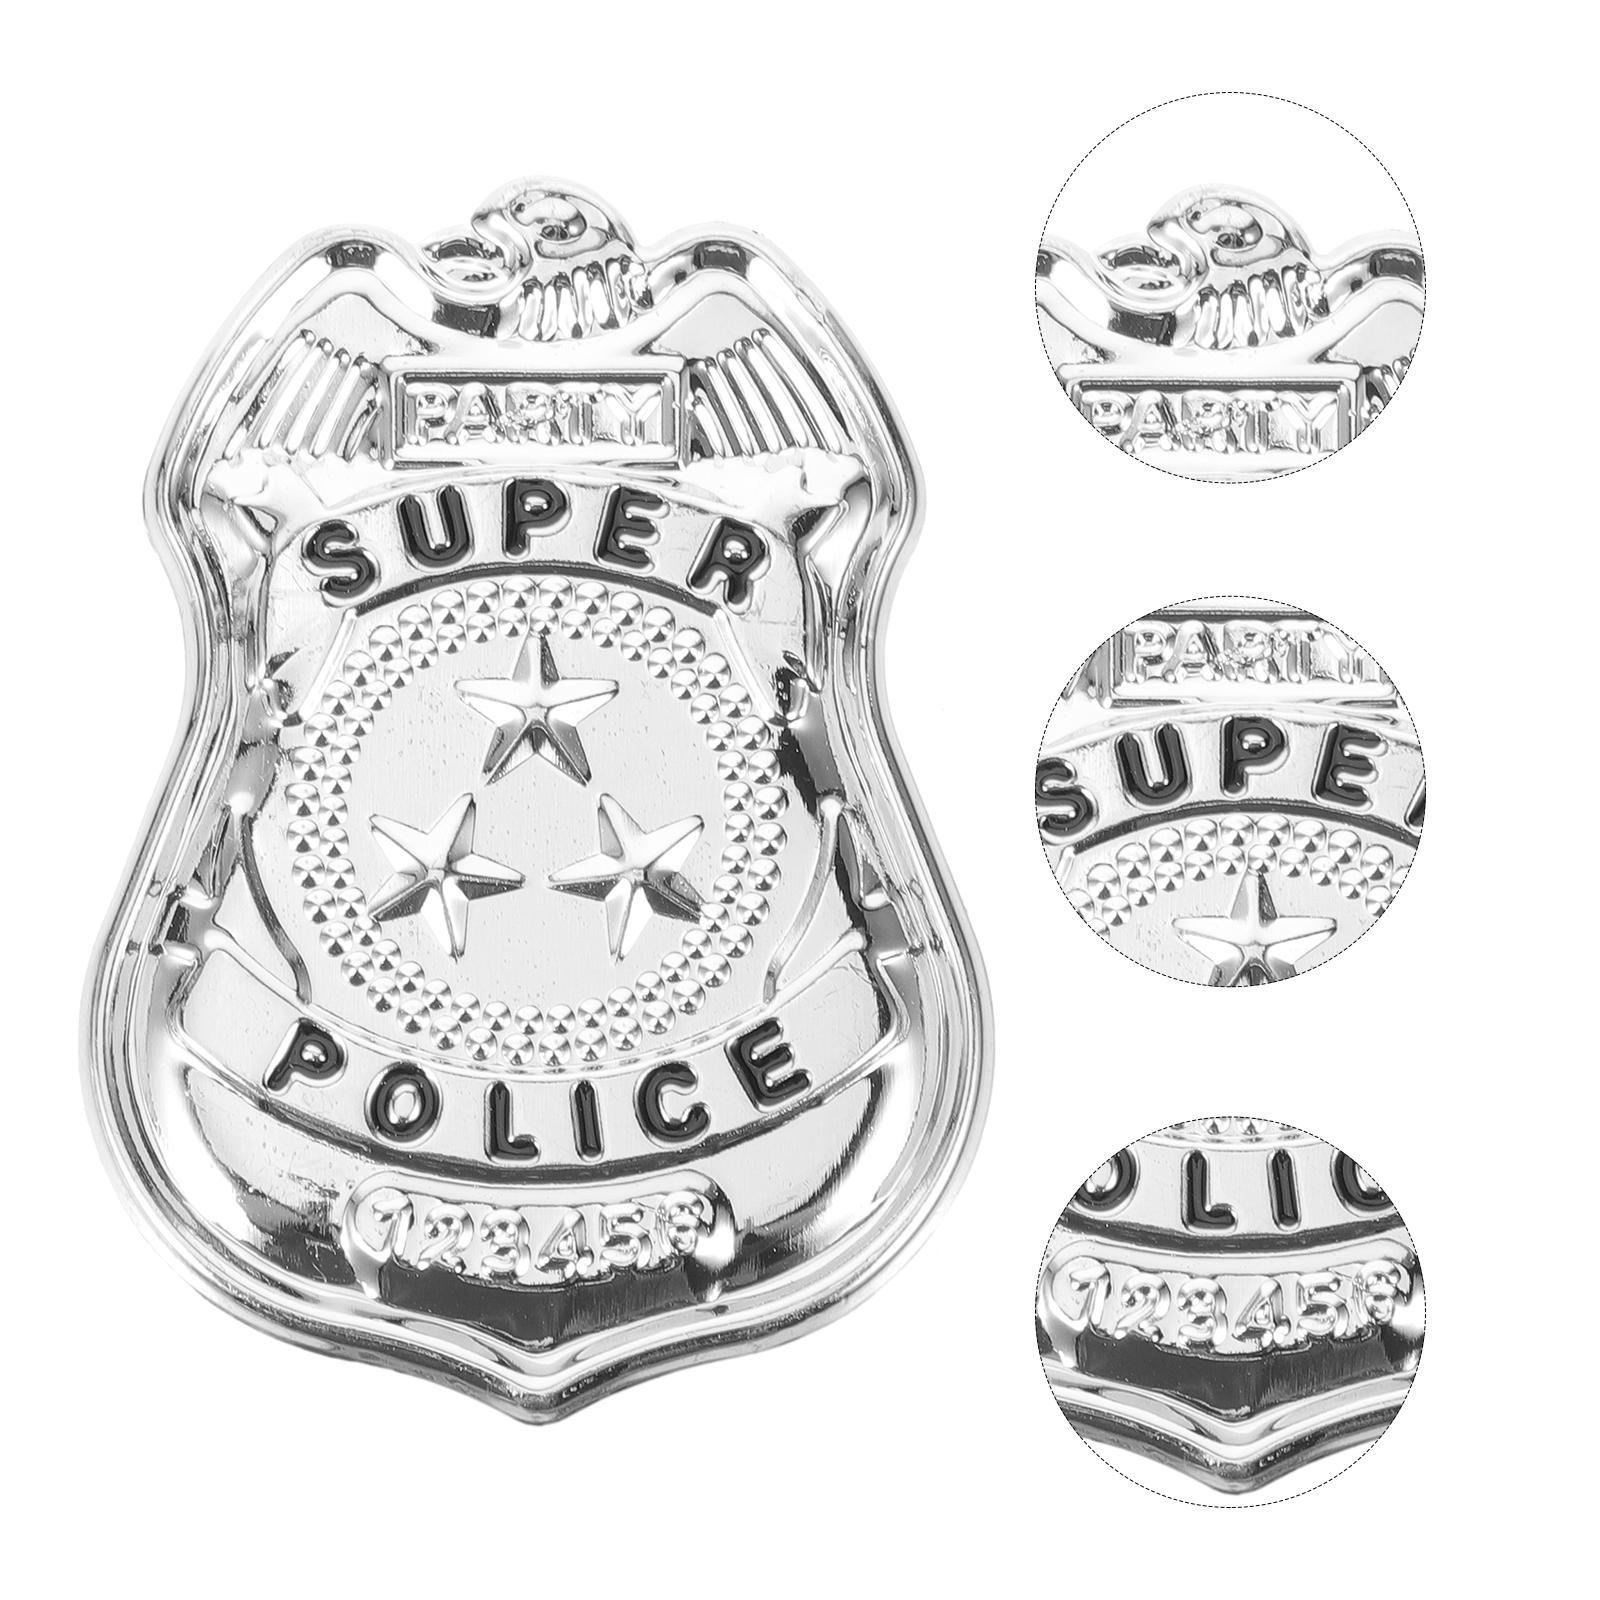 2Pcs Decorative Police Badge Brooch Ornament Metal Police Cosplay Police Badge Pin Halloween Supplies